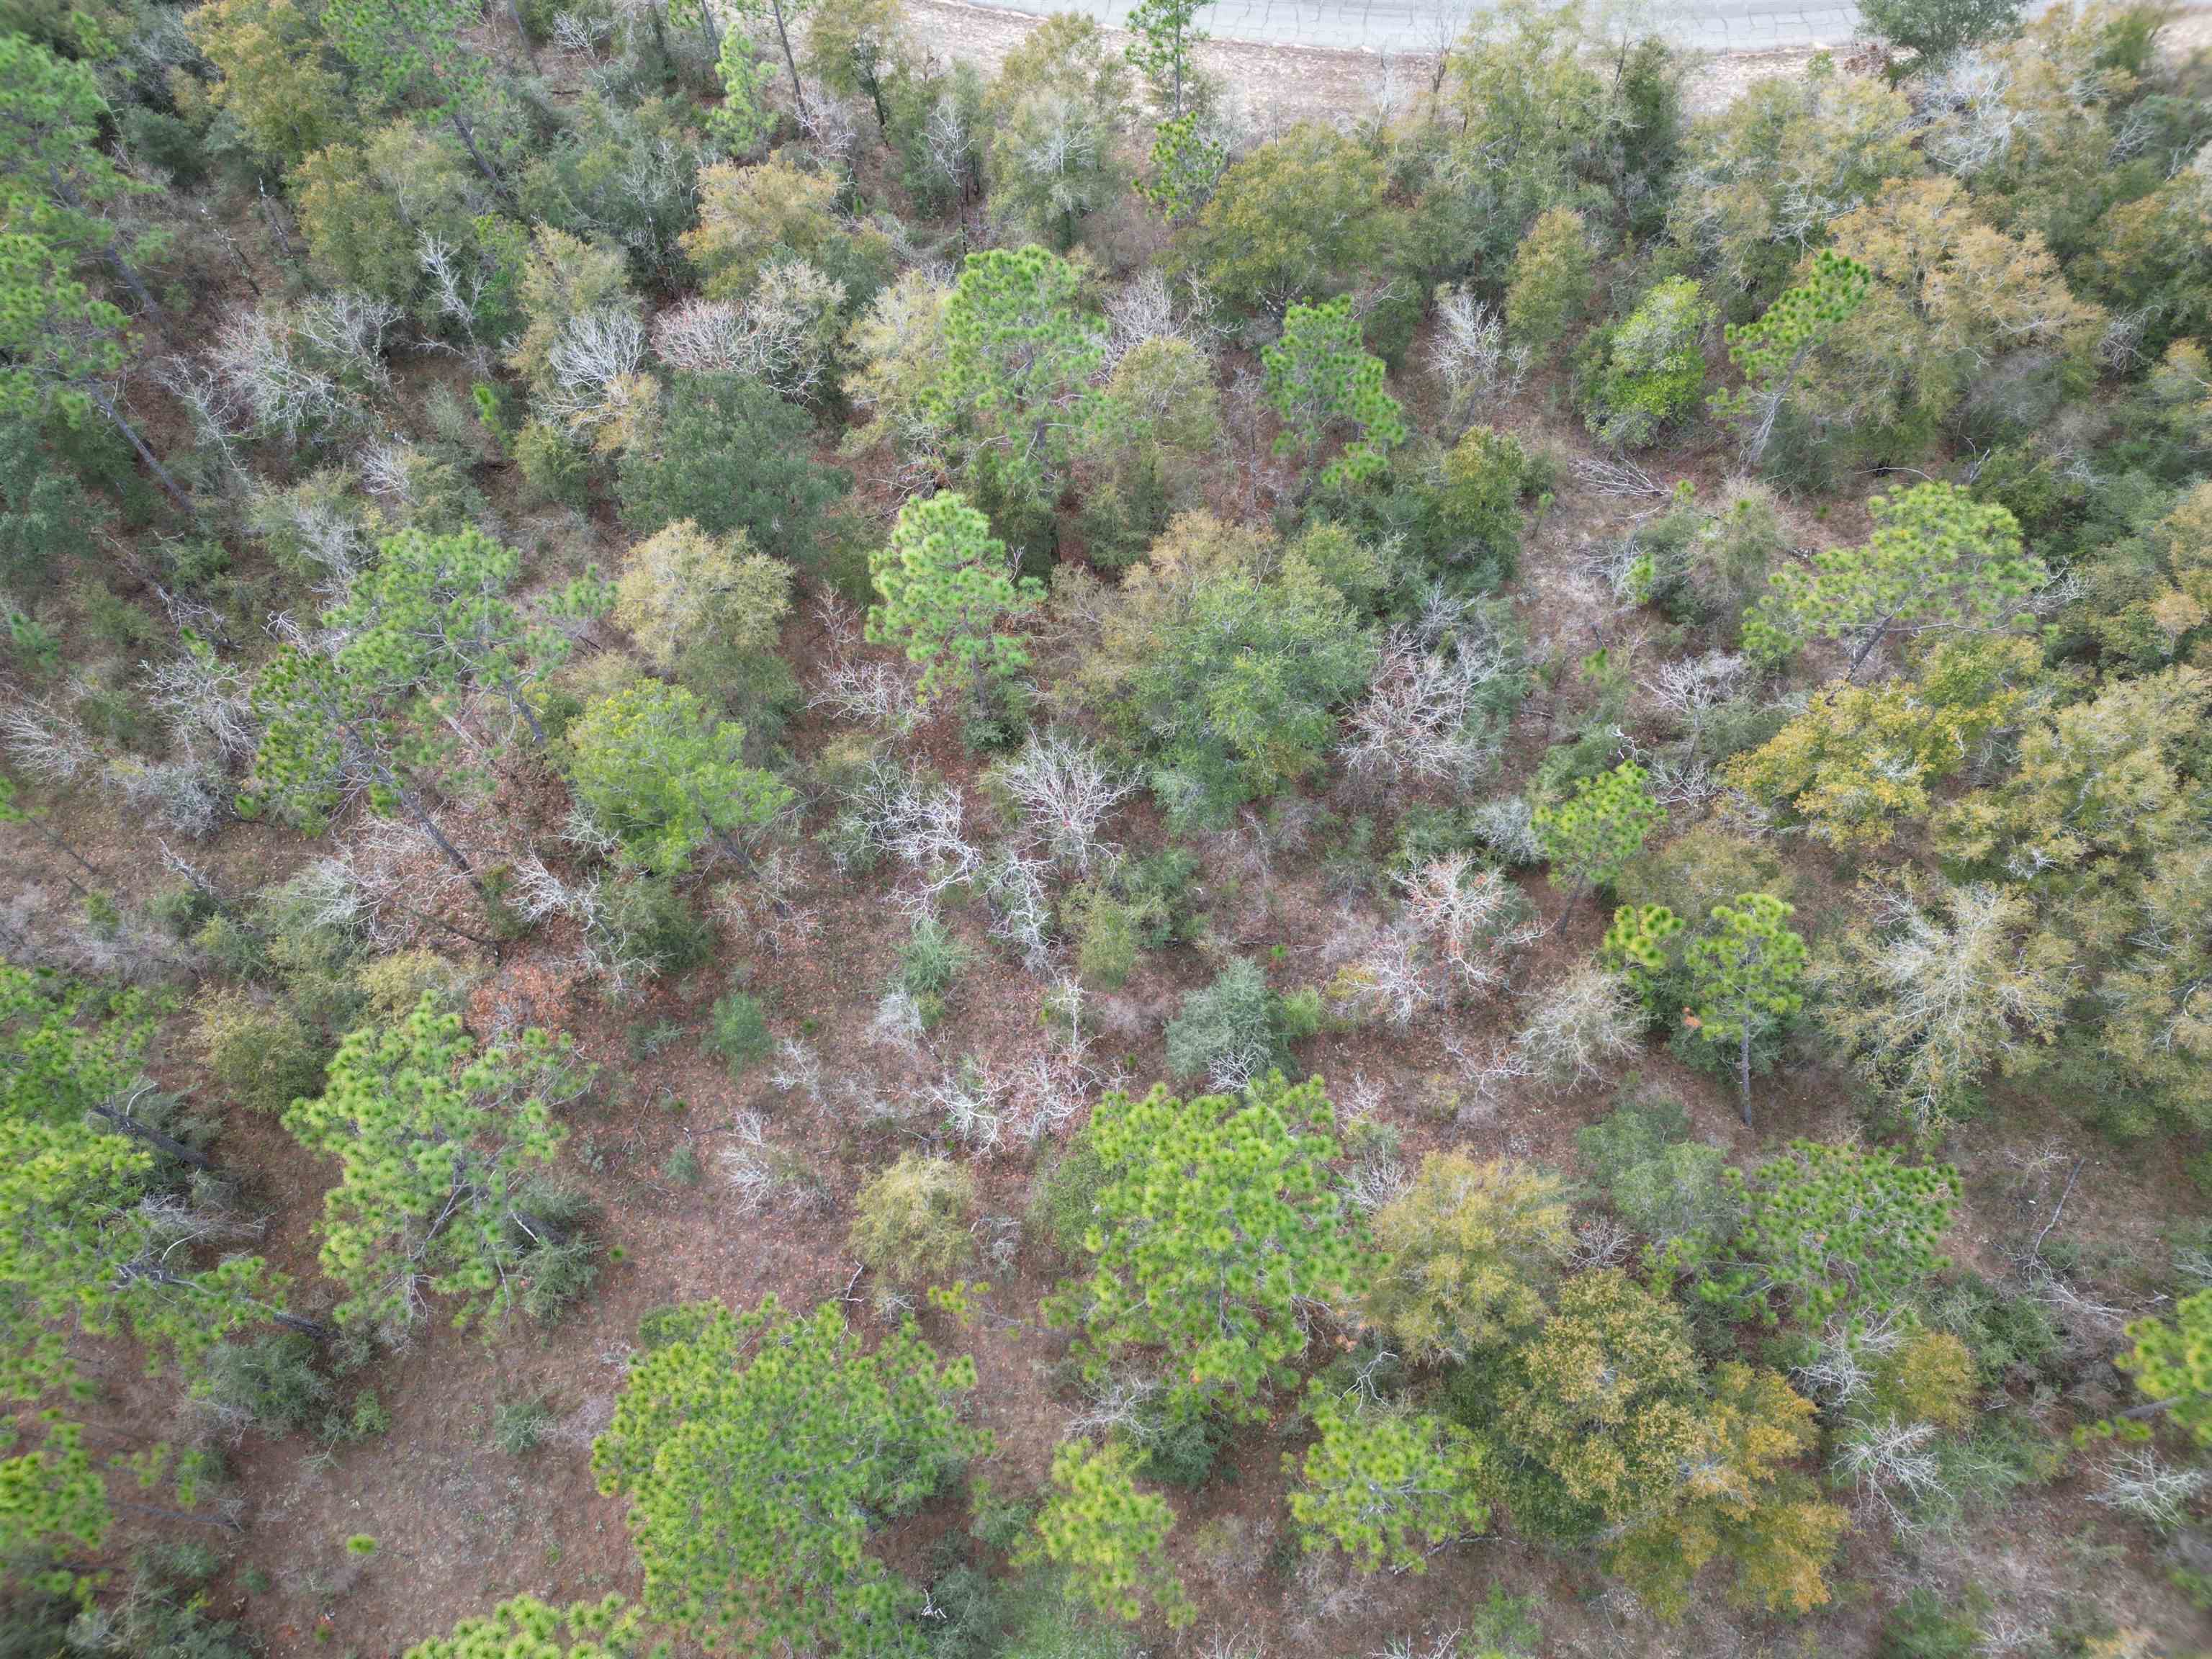 Amherst,CHIPLEY,Florida 32428,Lots and land,Amherst,367190